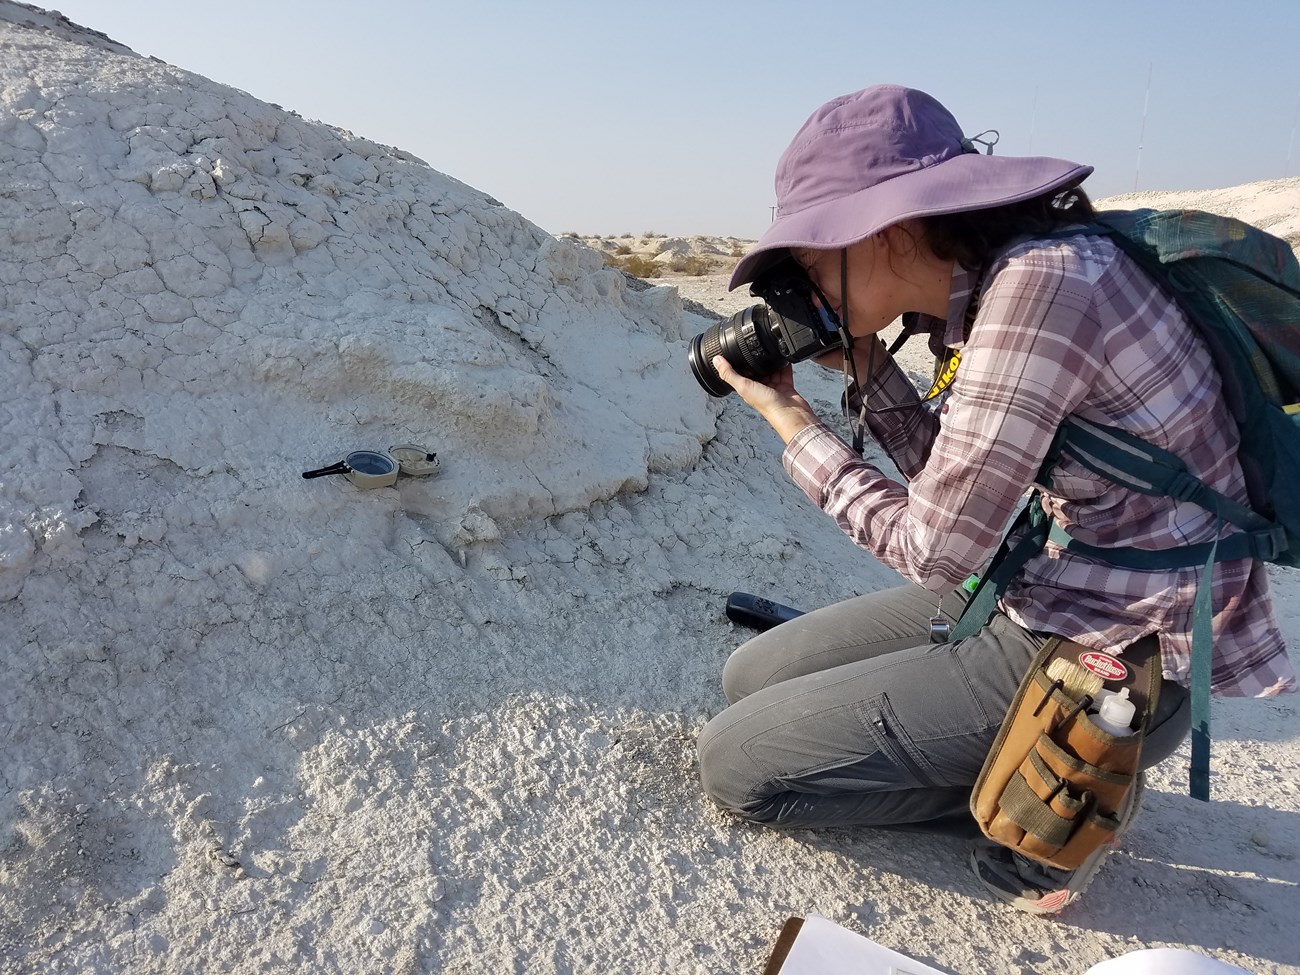 A young woman in a purple hat and sunshirt kneels next to a rock. She looks through her digital camera to photograph a fossil.